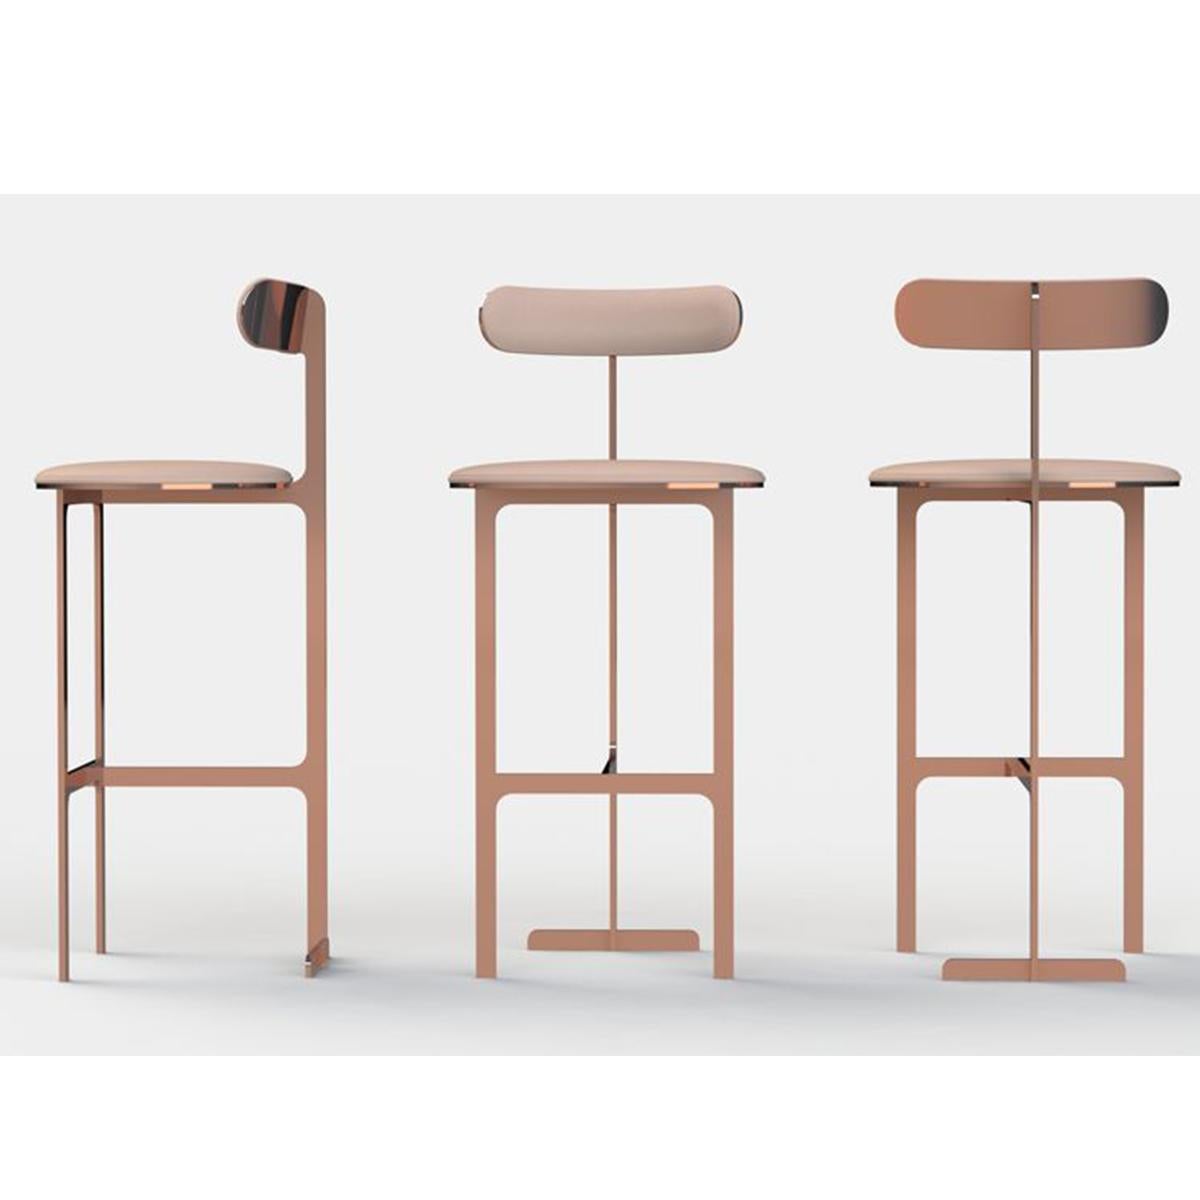 Available immediately from our stock in Paris

Polished Copper Metal and Bone Leather upholstered counter stools
designed by Yabu Pushelberg. Condition, excellent. Like New. 

Set of 3. This set can be divided upon request.